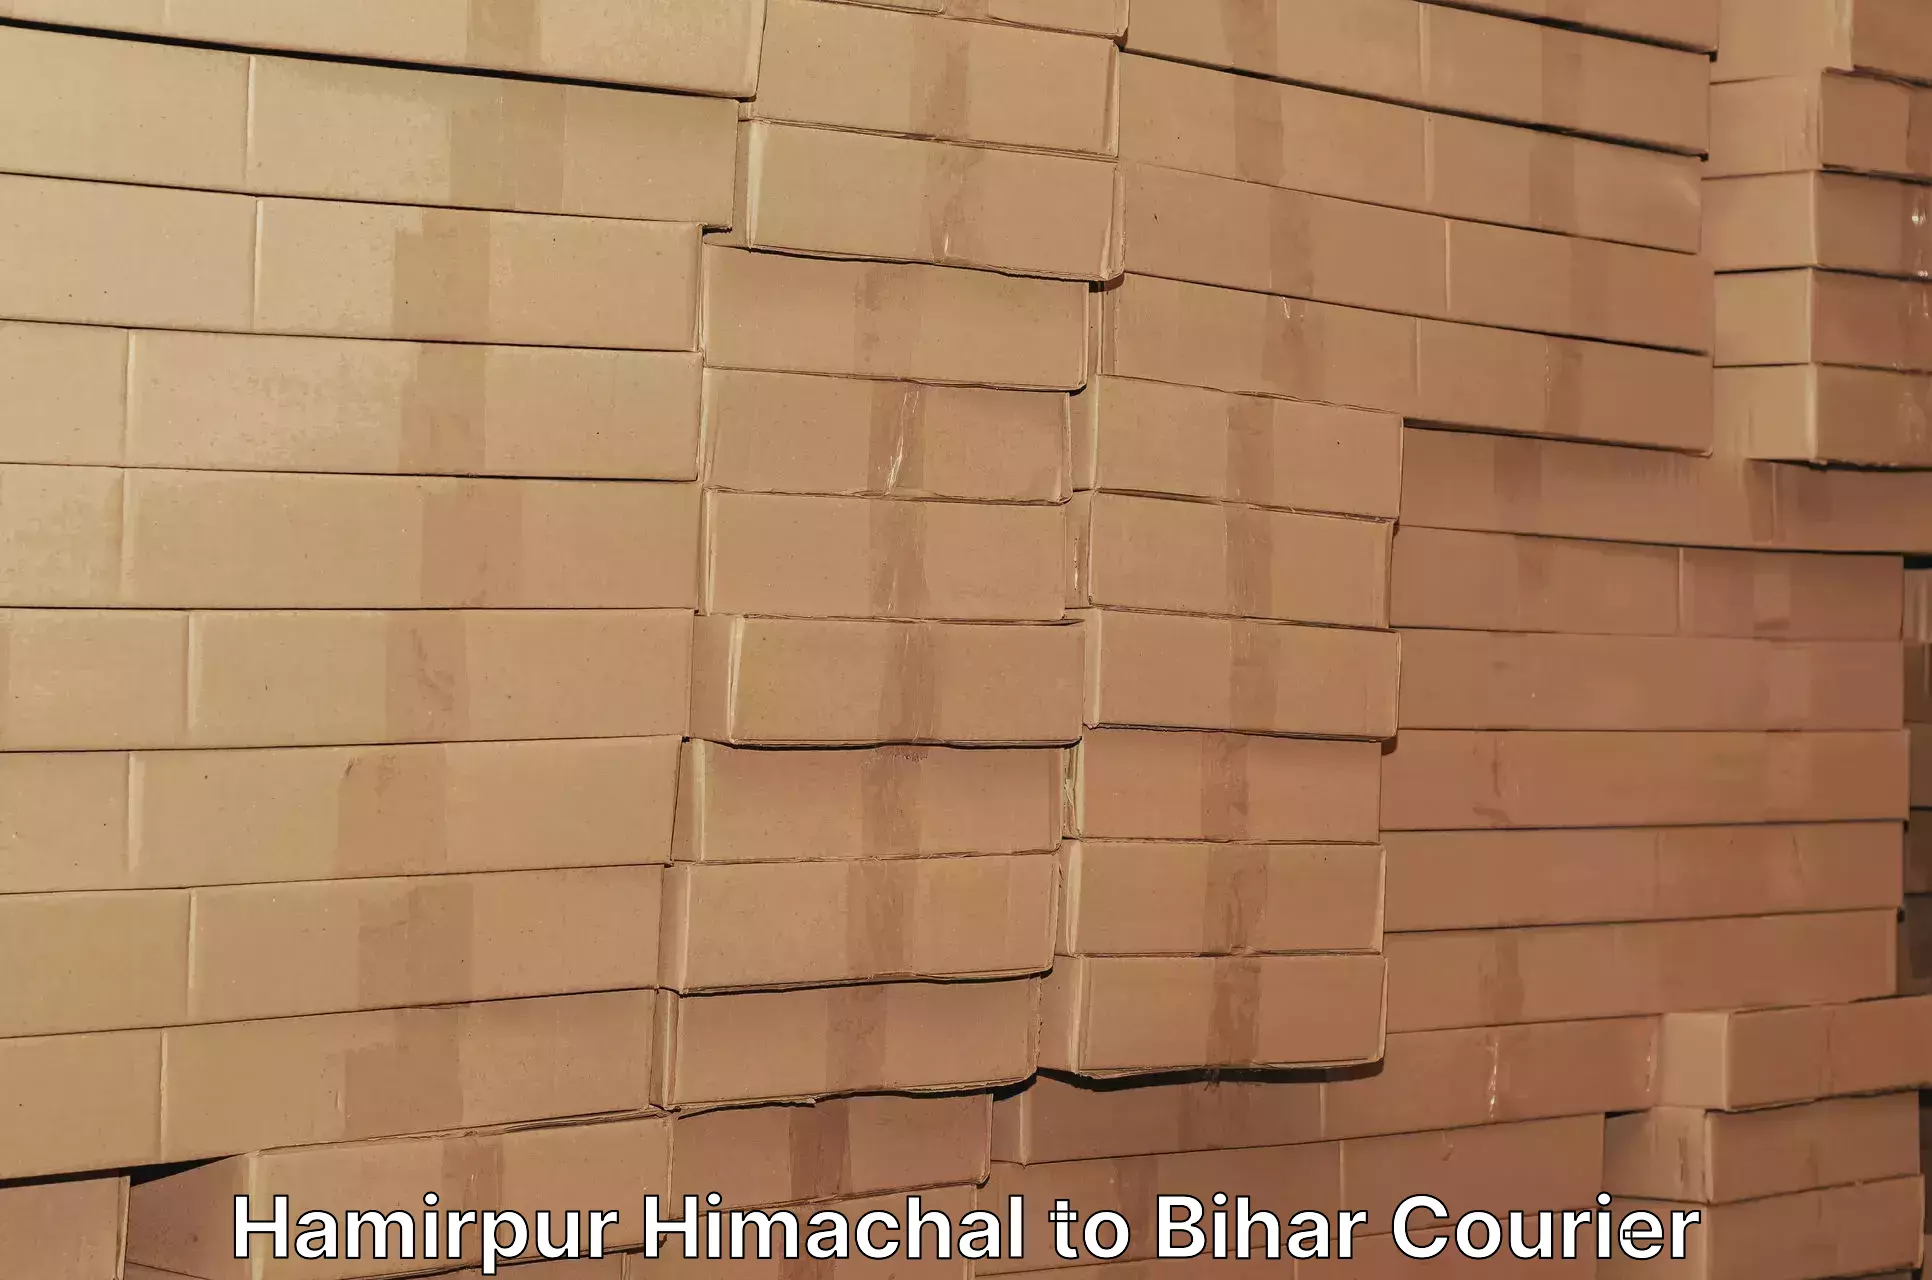 Courier service partnerships Hamirpur Himachal to Sharfuddinpur